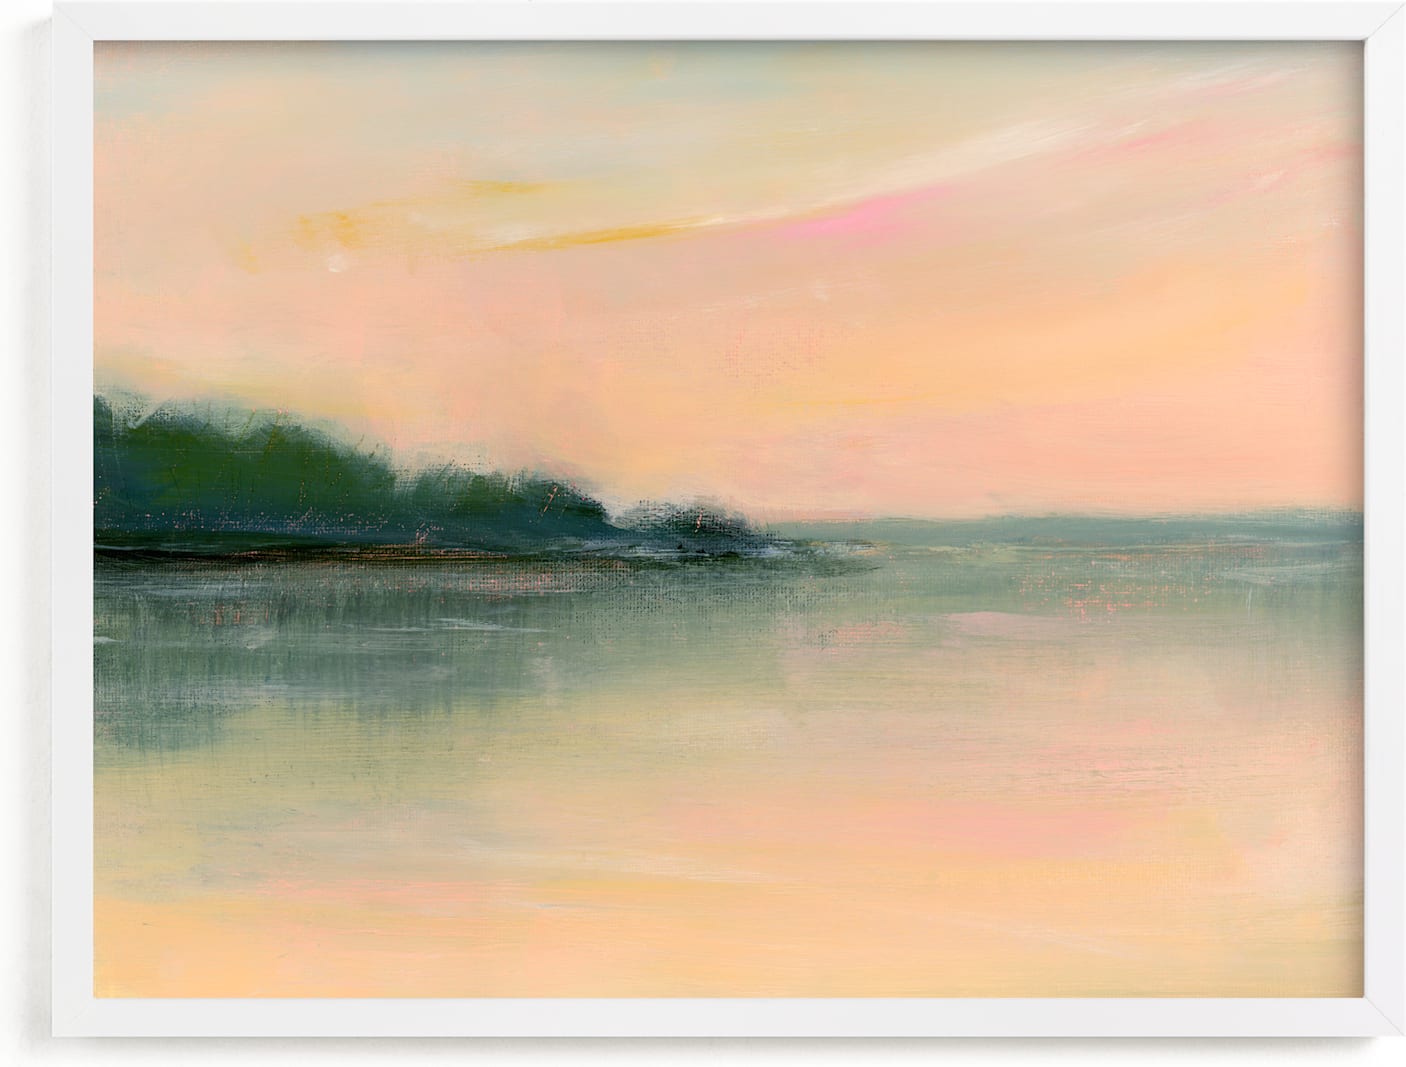 This is a pink, orange, green art by Lindsay Megahed called Quiet Cove.